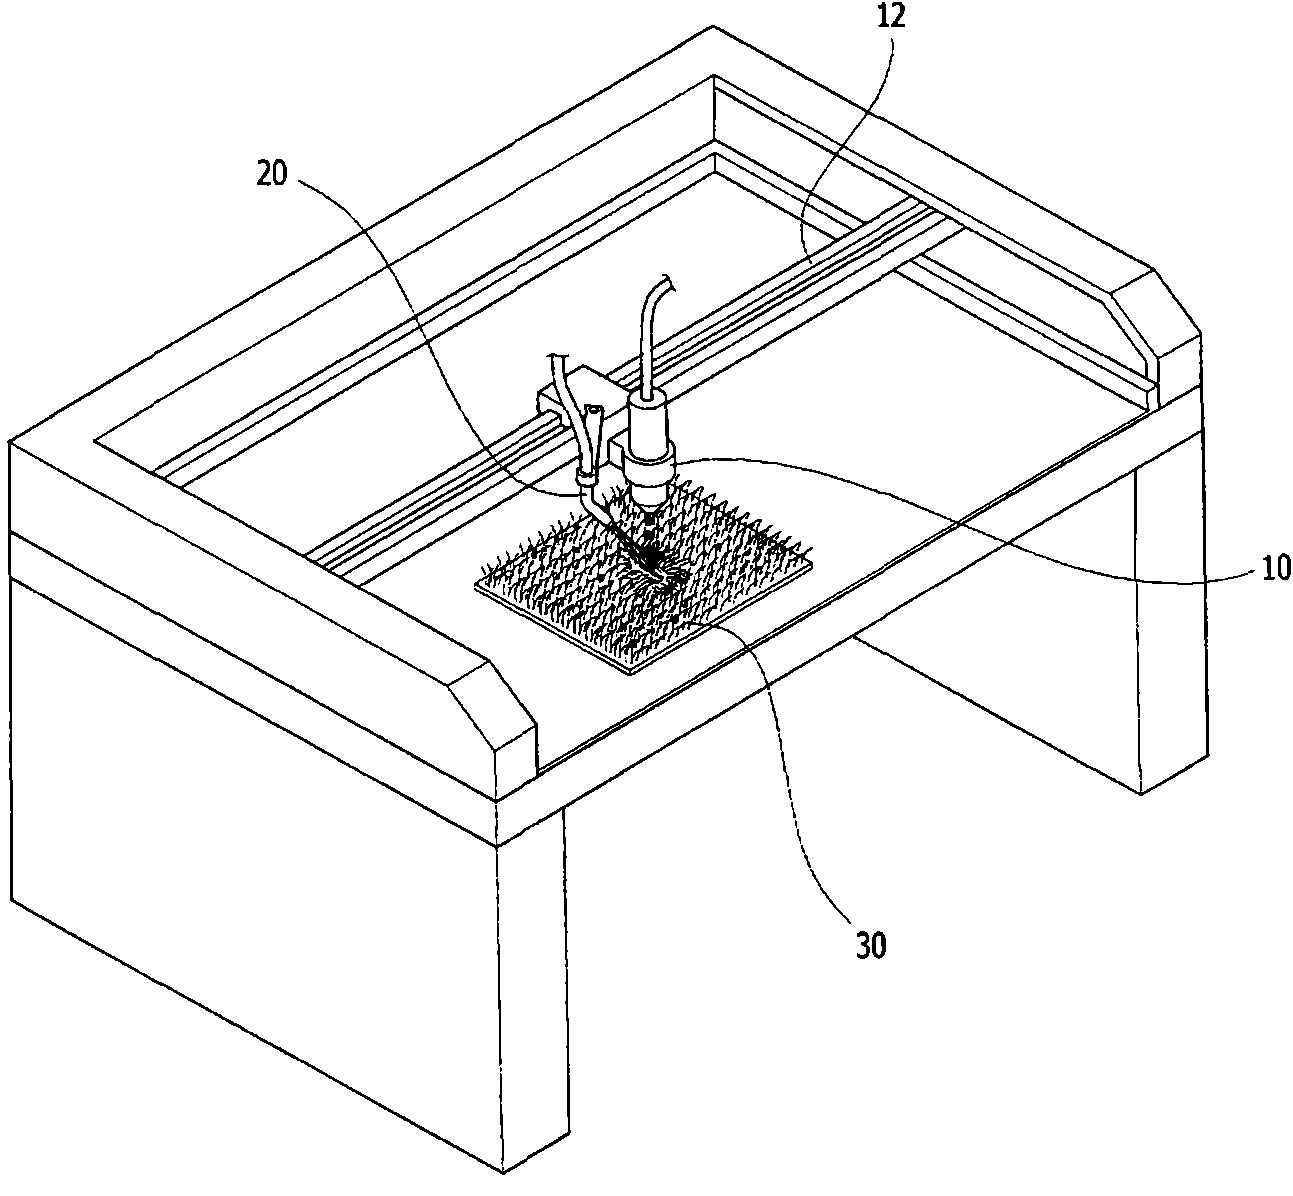 Laser device for cutting fur and fur cutting method using laser device